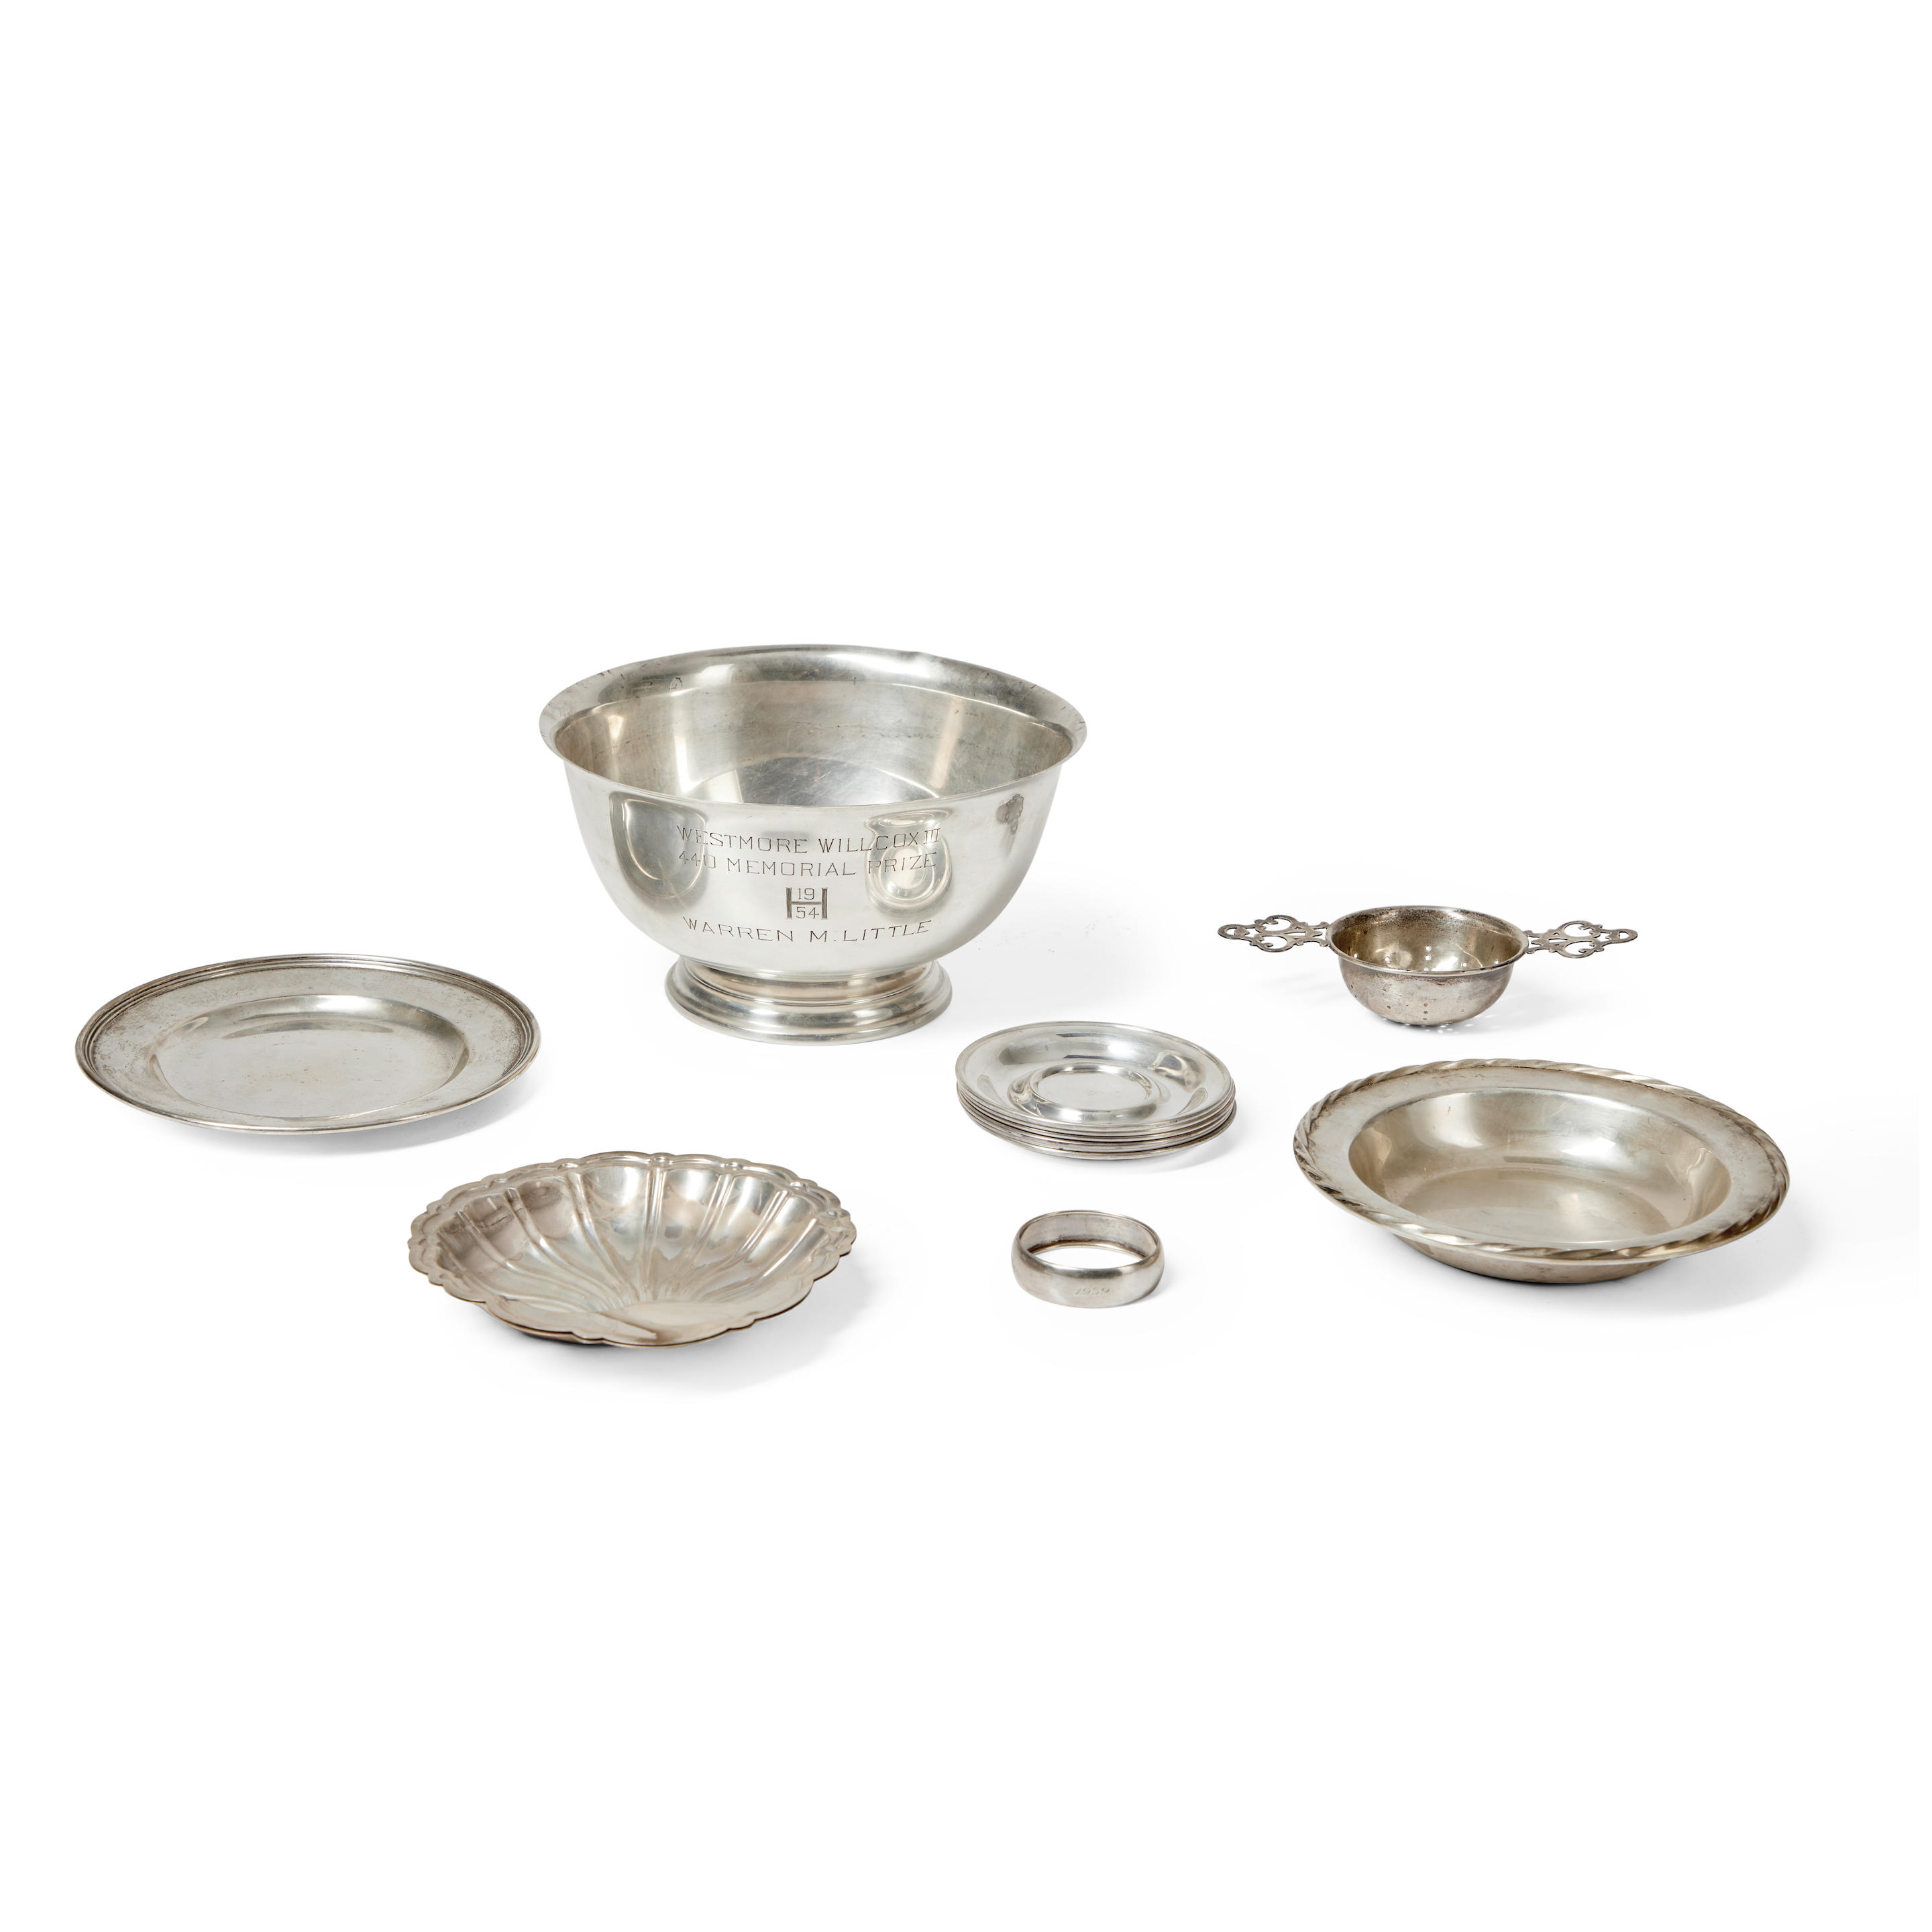 THIRTEEN PIECES OF STERLING SILVER TABLEWARE